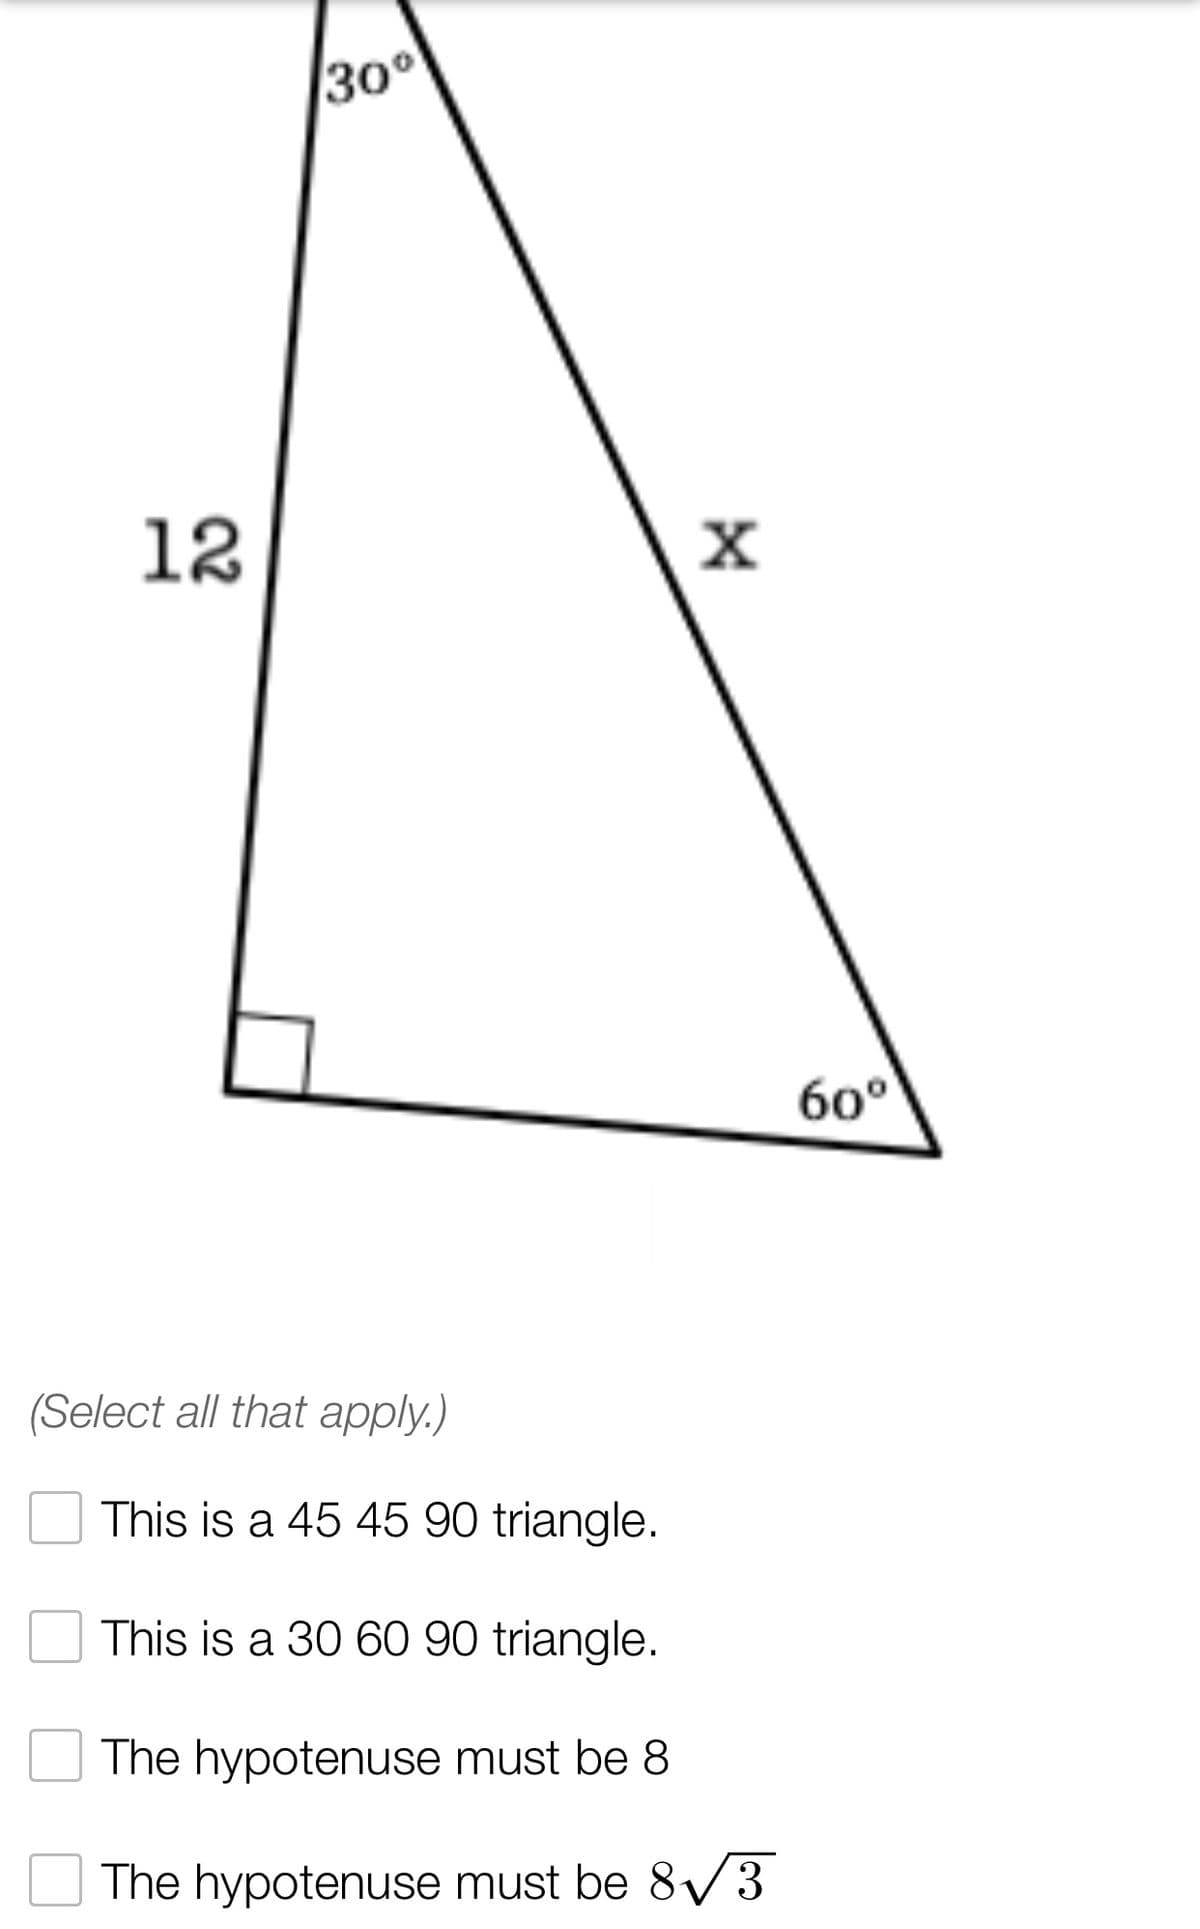 30°
12
(Select all that apply.)
X
This is a 45 45 90 triangle.
This is a 30 60 90 triangle.
The hypotenuse must be 8
The hypotenuse must be 8√3
60°